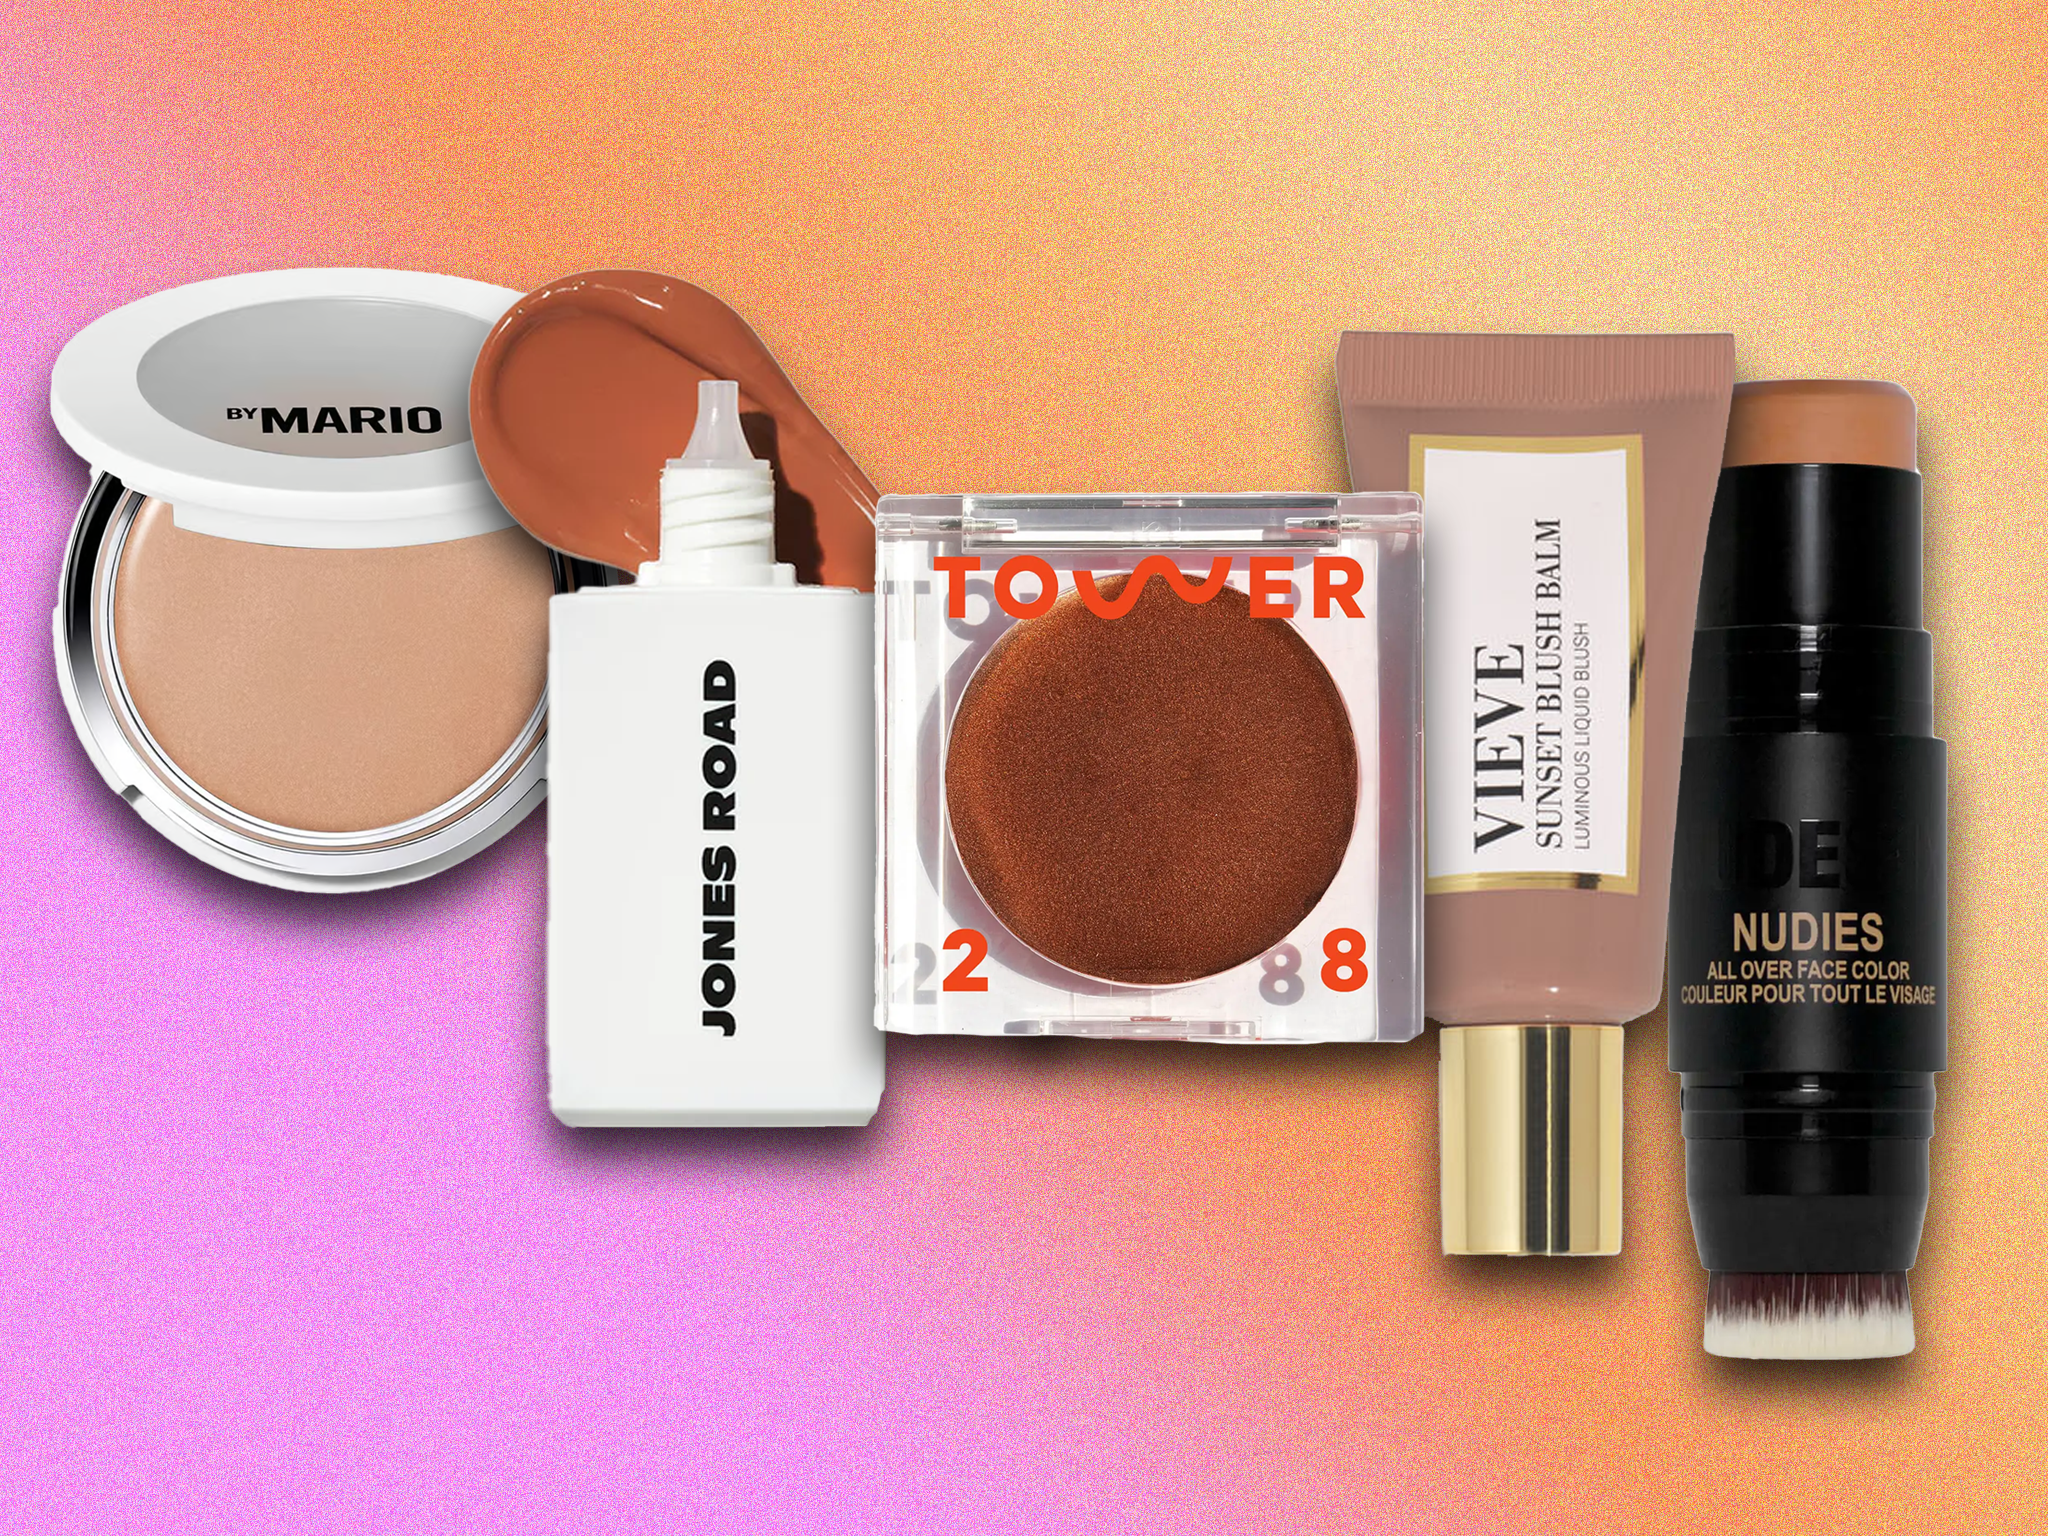 19 Best Self-Tanners That Really Work, According to Testers 2023